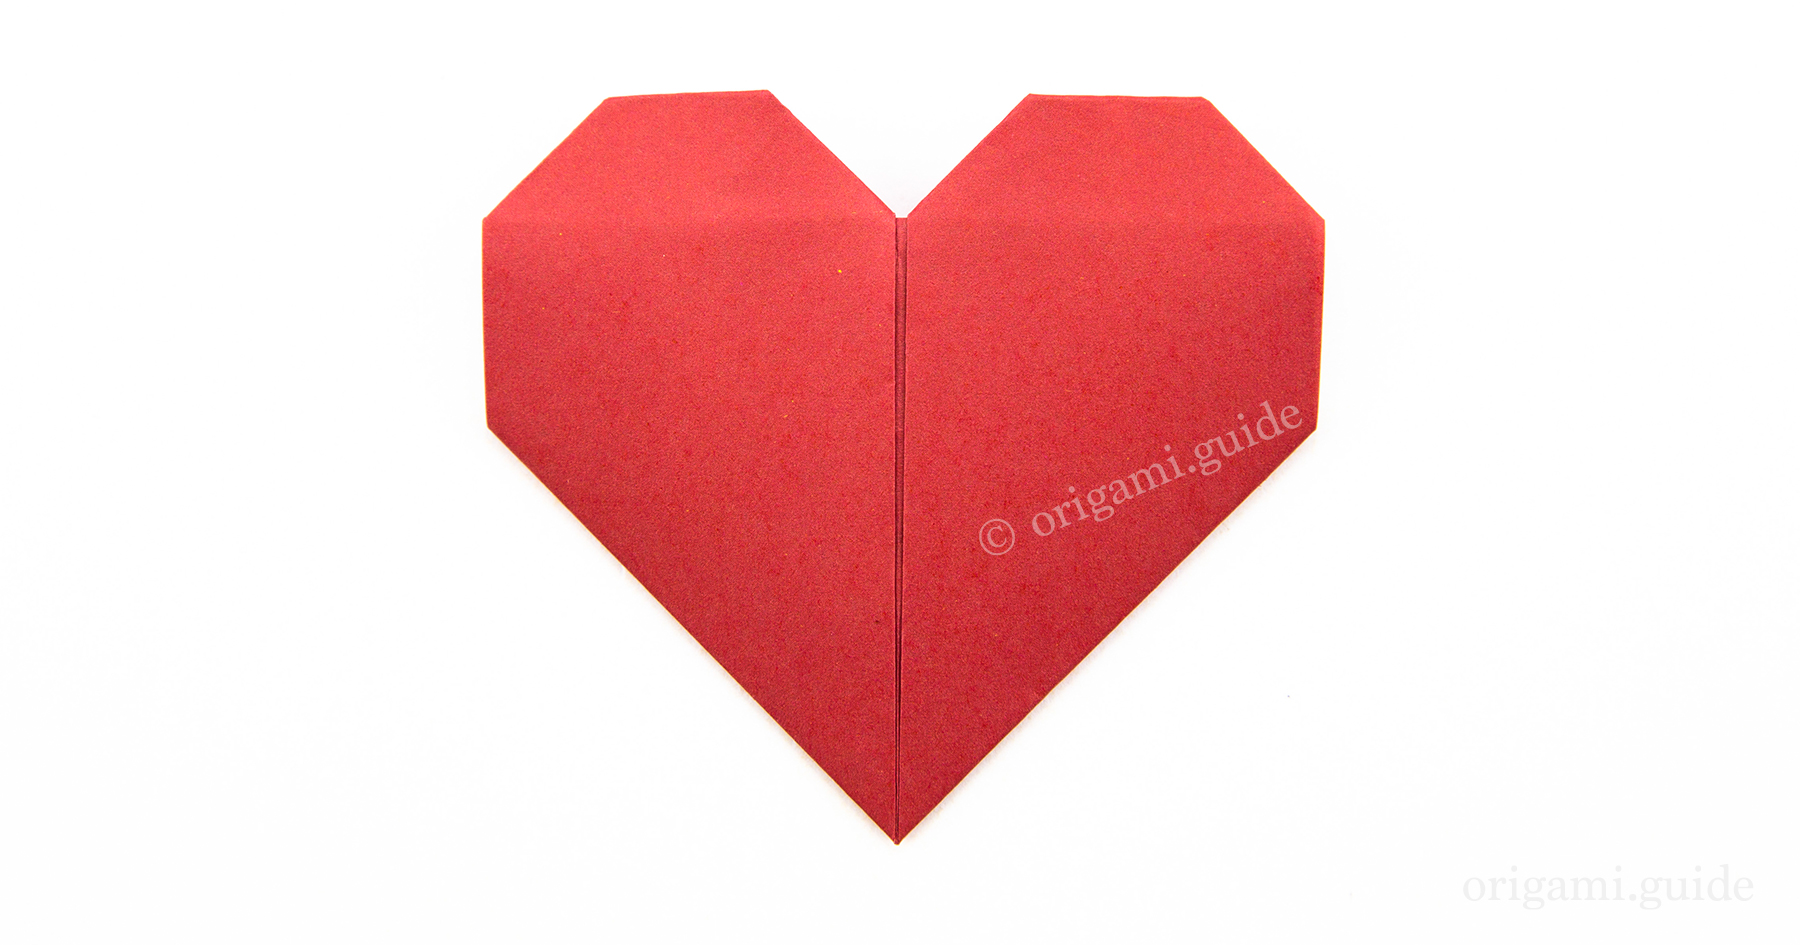 How To Make An Origami Heart Origami Guide